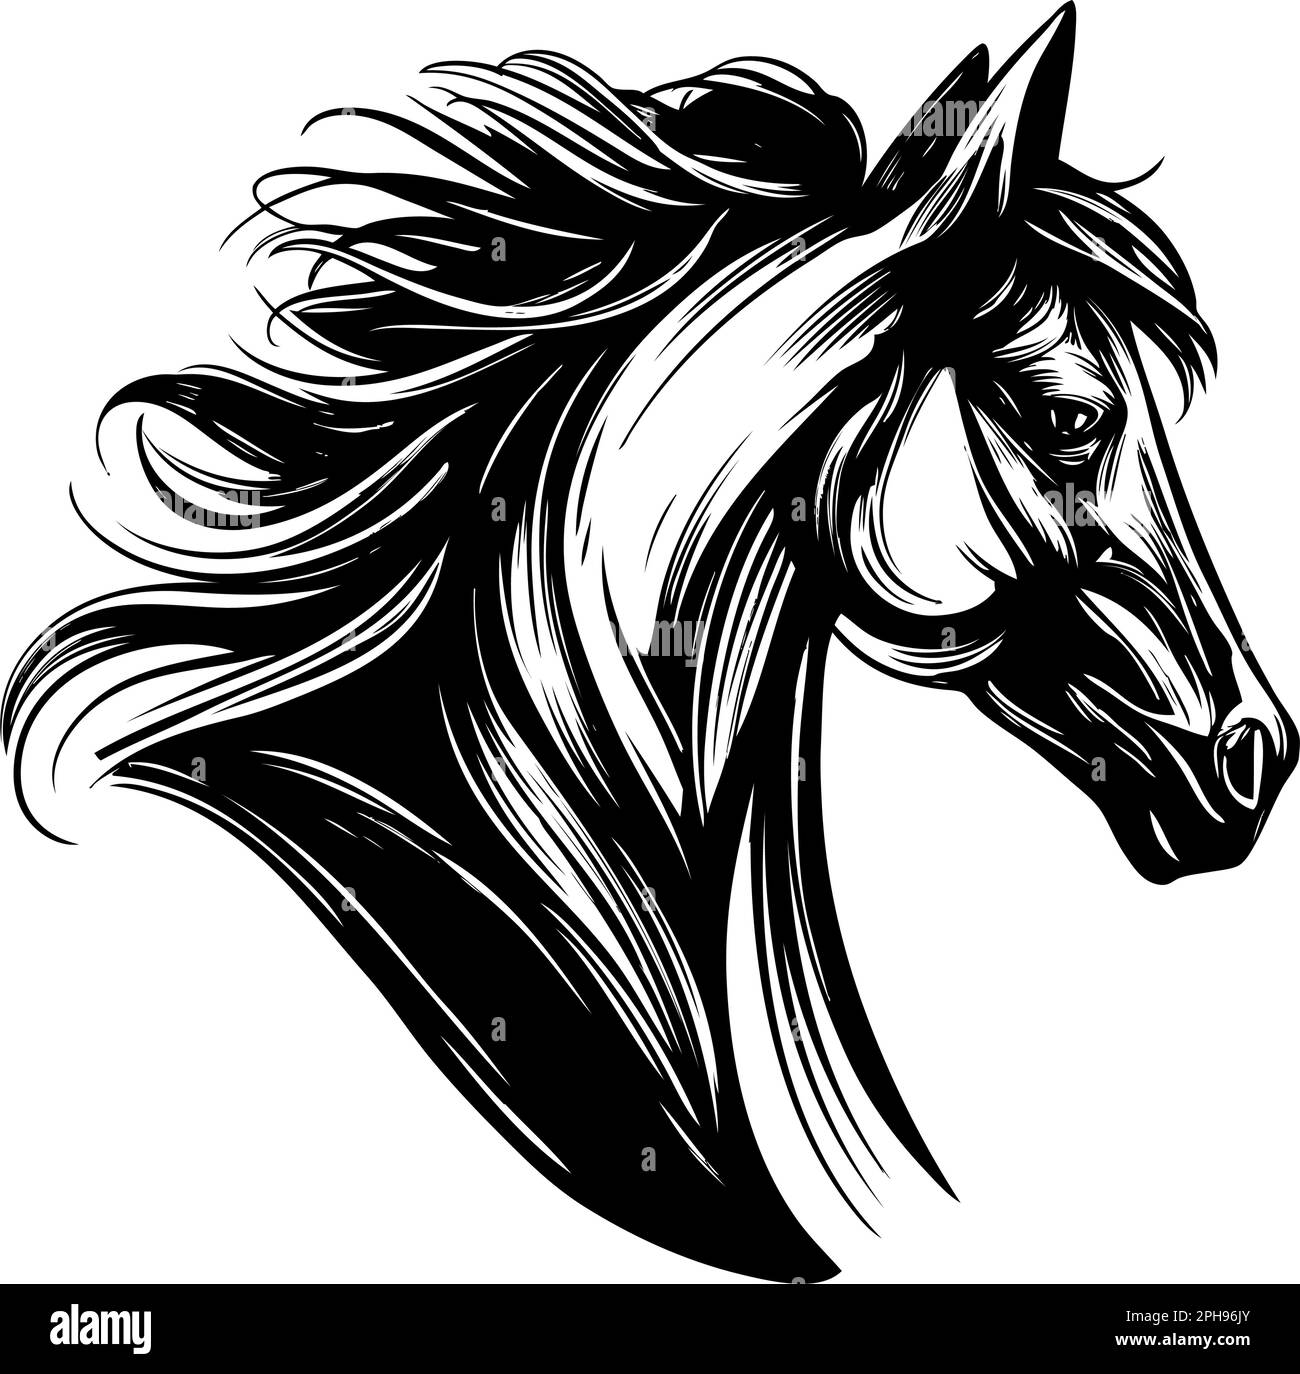 How to draw a horse's head | Drawing horses & ponies | Pony Magazine